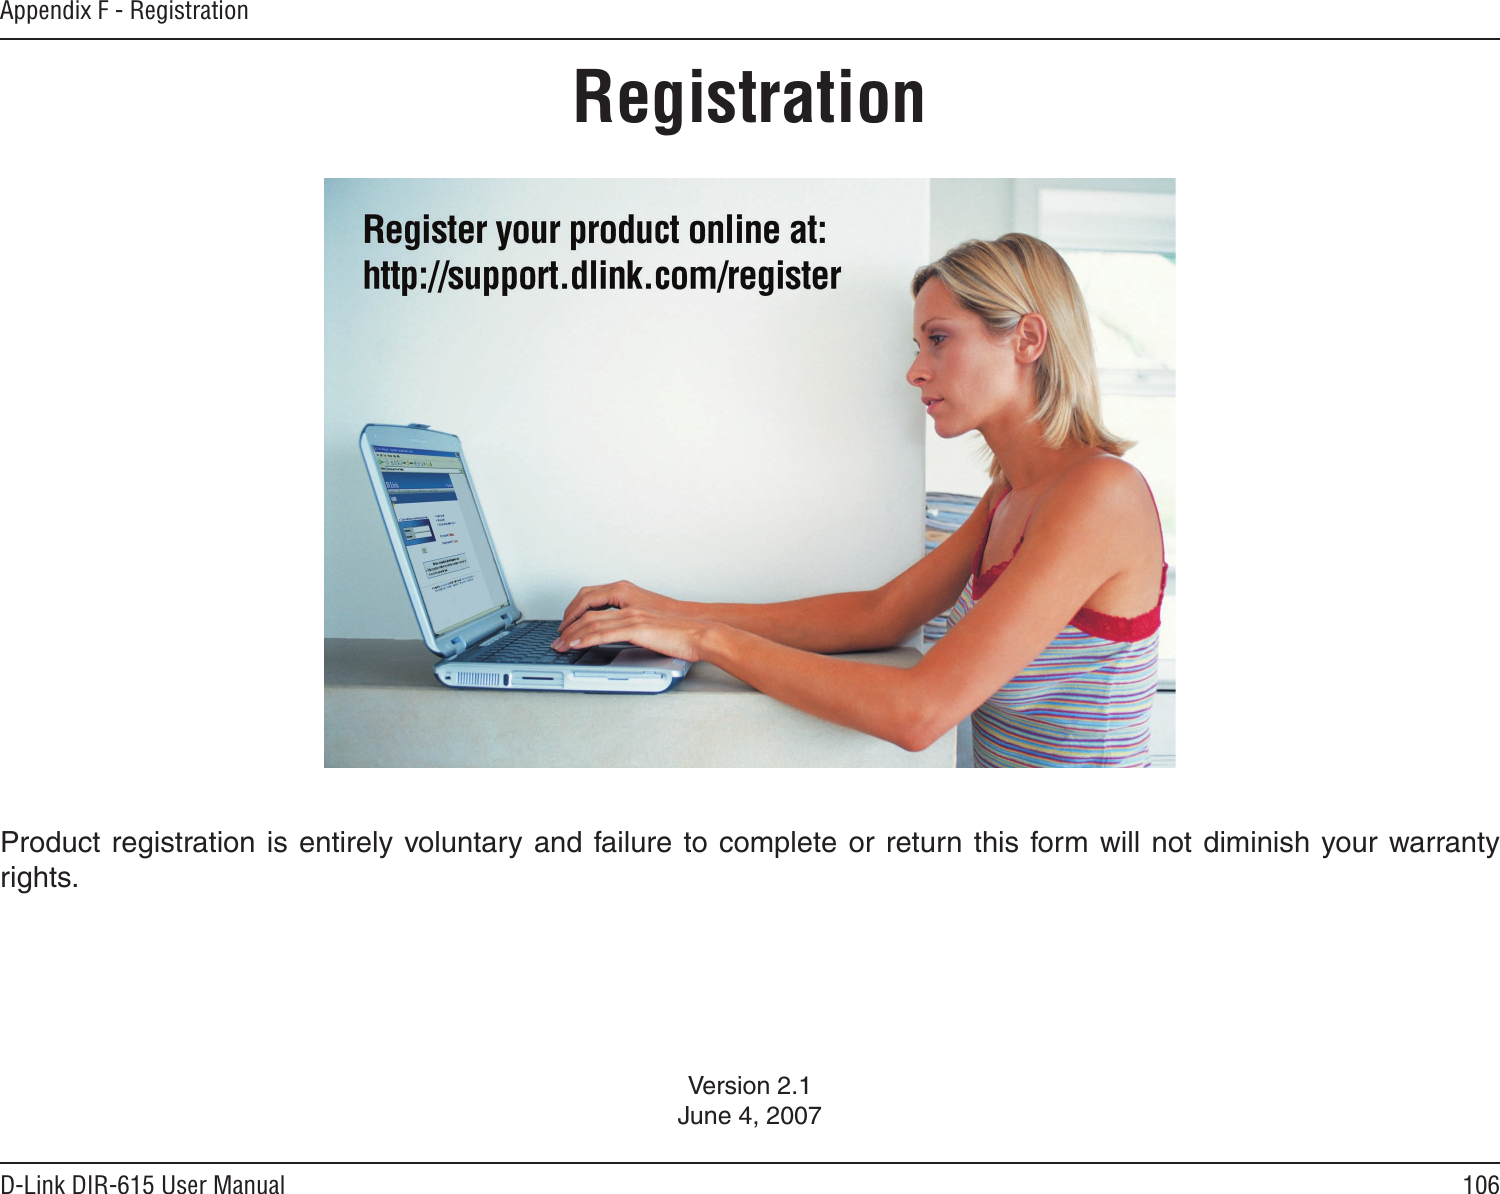 106D-Link DIR-615 User ManualAppendix F - RegistrationVersion 2.1June 4, 2007Product registration is entirely  voluntary  and  failure to complete or return this form will not diminish your warranty rights.Registration